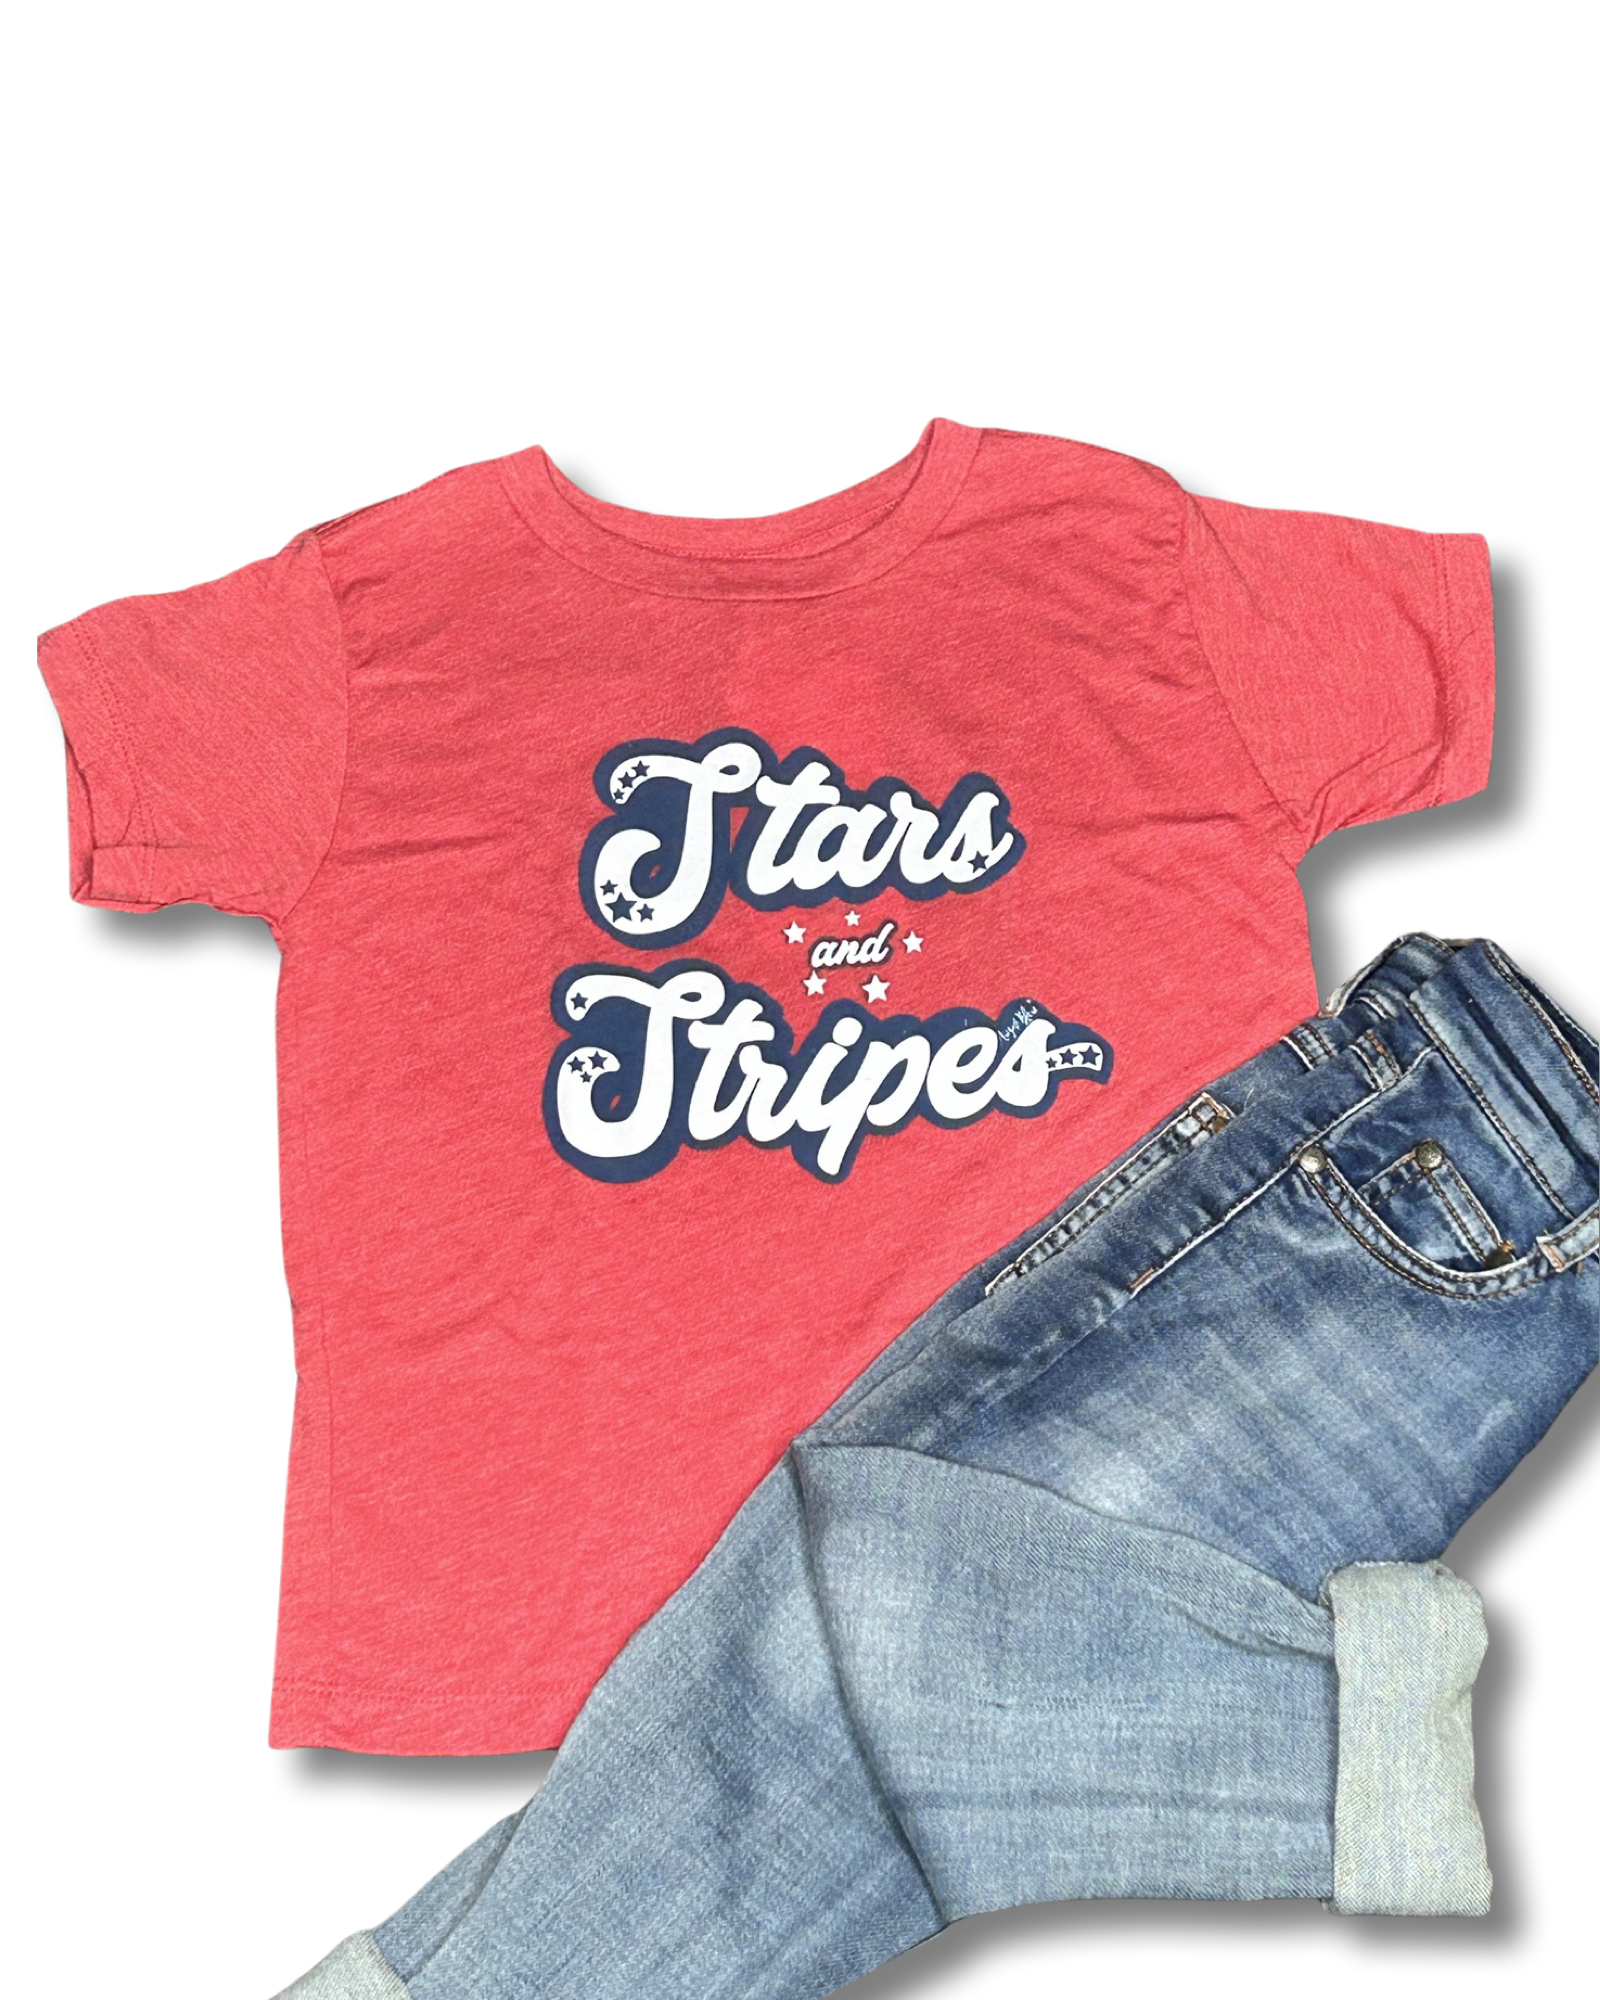 Stars and Stripes graphic on a red crew neck kids tee 